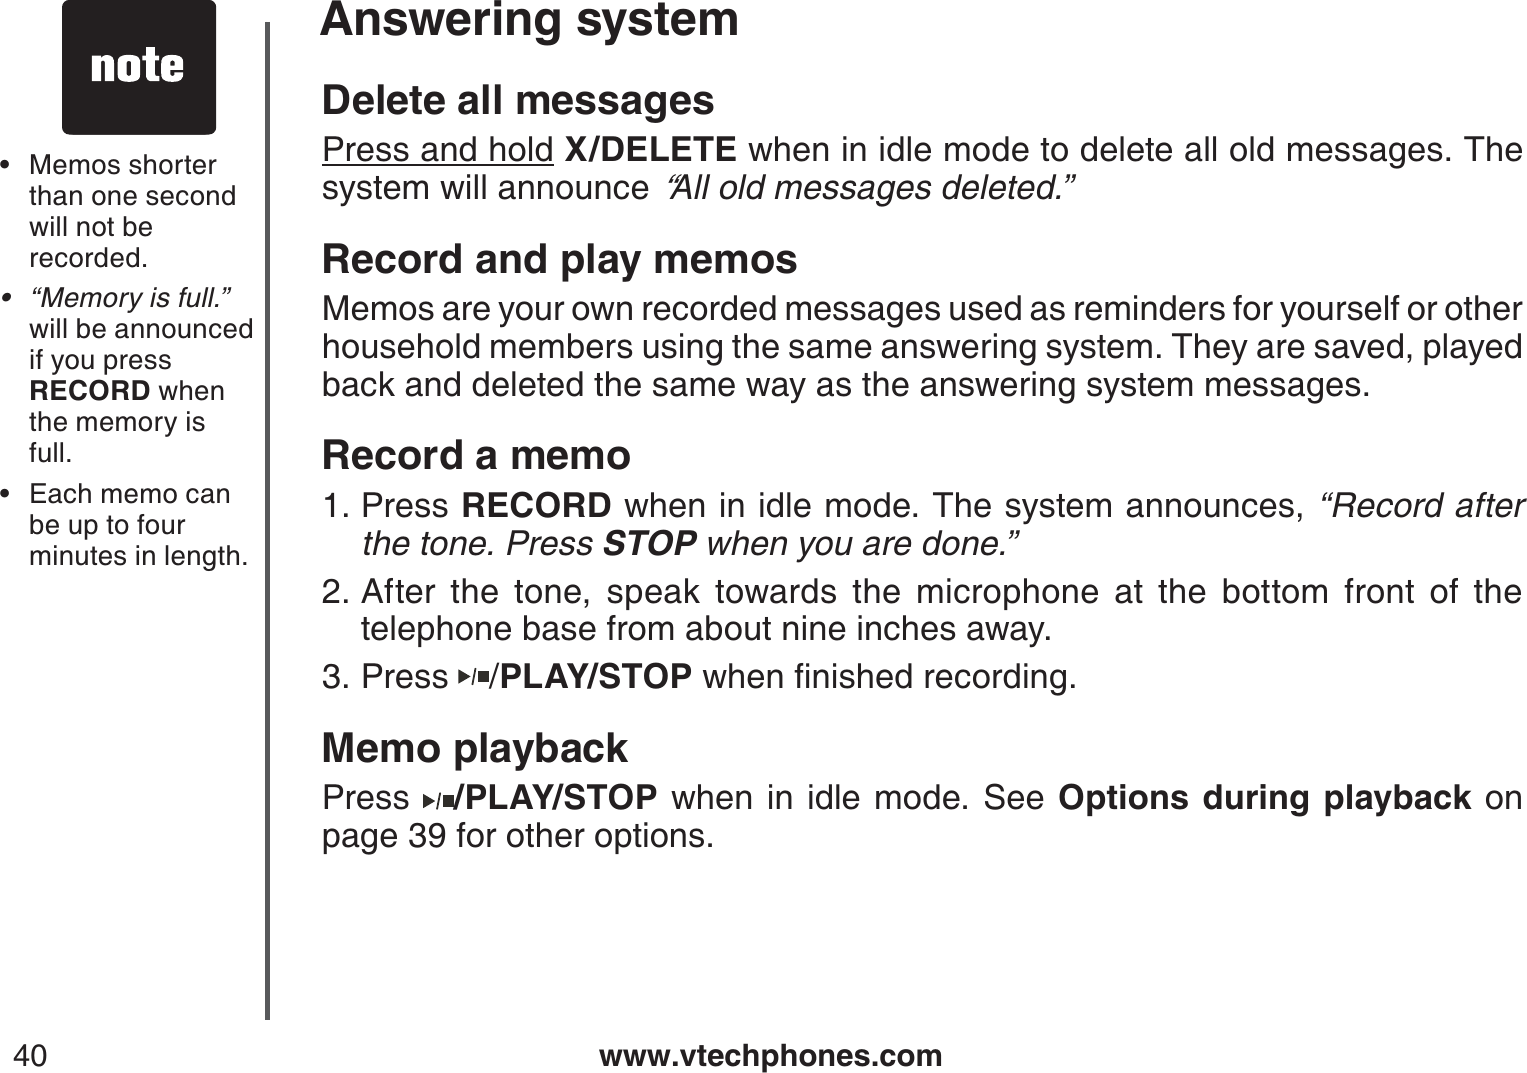 www.vtechphones.com40Answering systemDelete all messagesPress and hold X/DELETE when in idle mode to delete all old messages. The system will announce “All old messages deleted.”Record and play memosMemos are your own recorded messages used as reminders for yourself or other household members using the same answering system. They are saved, played back and deleted the same way as the answering system messages.Record a memoPress RECORD when in idle mode. The system announces, “Record after the tone. Press STOP when you are done.” After the tone, speak towards the microphone at the bottom front of the telephone base from about nine inches away.Press  /PLAY/STOPYJGPſPKUJGFTGEQTFKPIMemo playbackPress  /PLAY/STOP when in idle mode. See Options during playback on page 39 for other options.1.2.3.Memos shorter than one second will not be recorded.“Memory is full.” will be announced if you press RECORD when the memory isfull.Each memo can be up to four minutes in length.•••